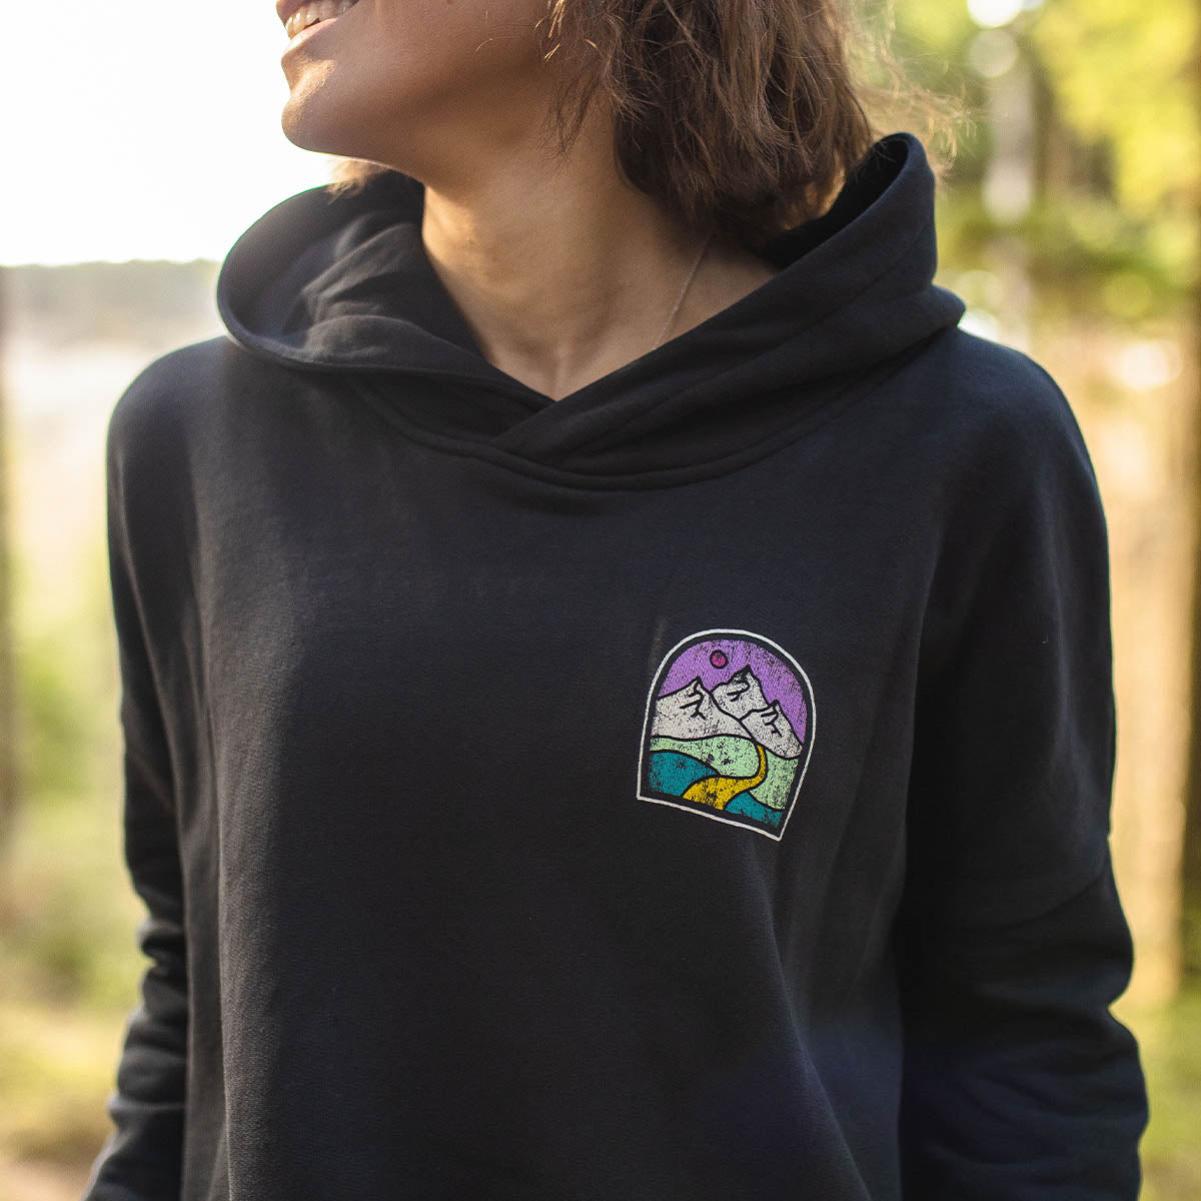 Women Passenger Clothing Refashion Black Hoodies & Sweatshirts Friday Collective Recycled Cotton Hoodie - 1